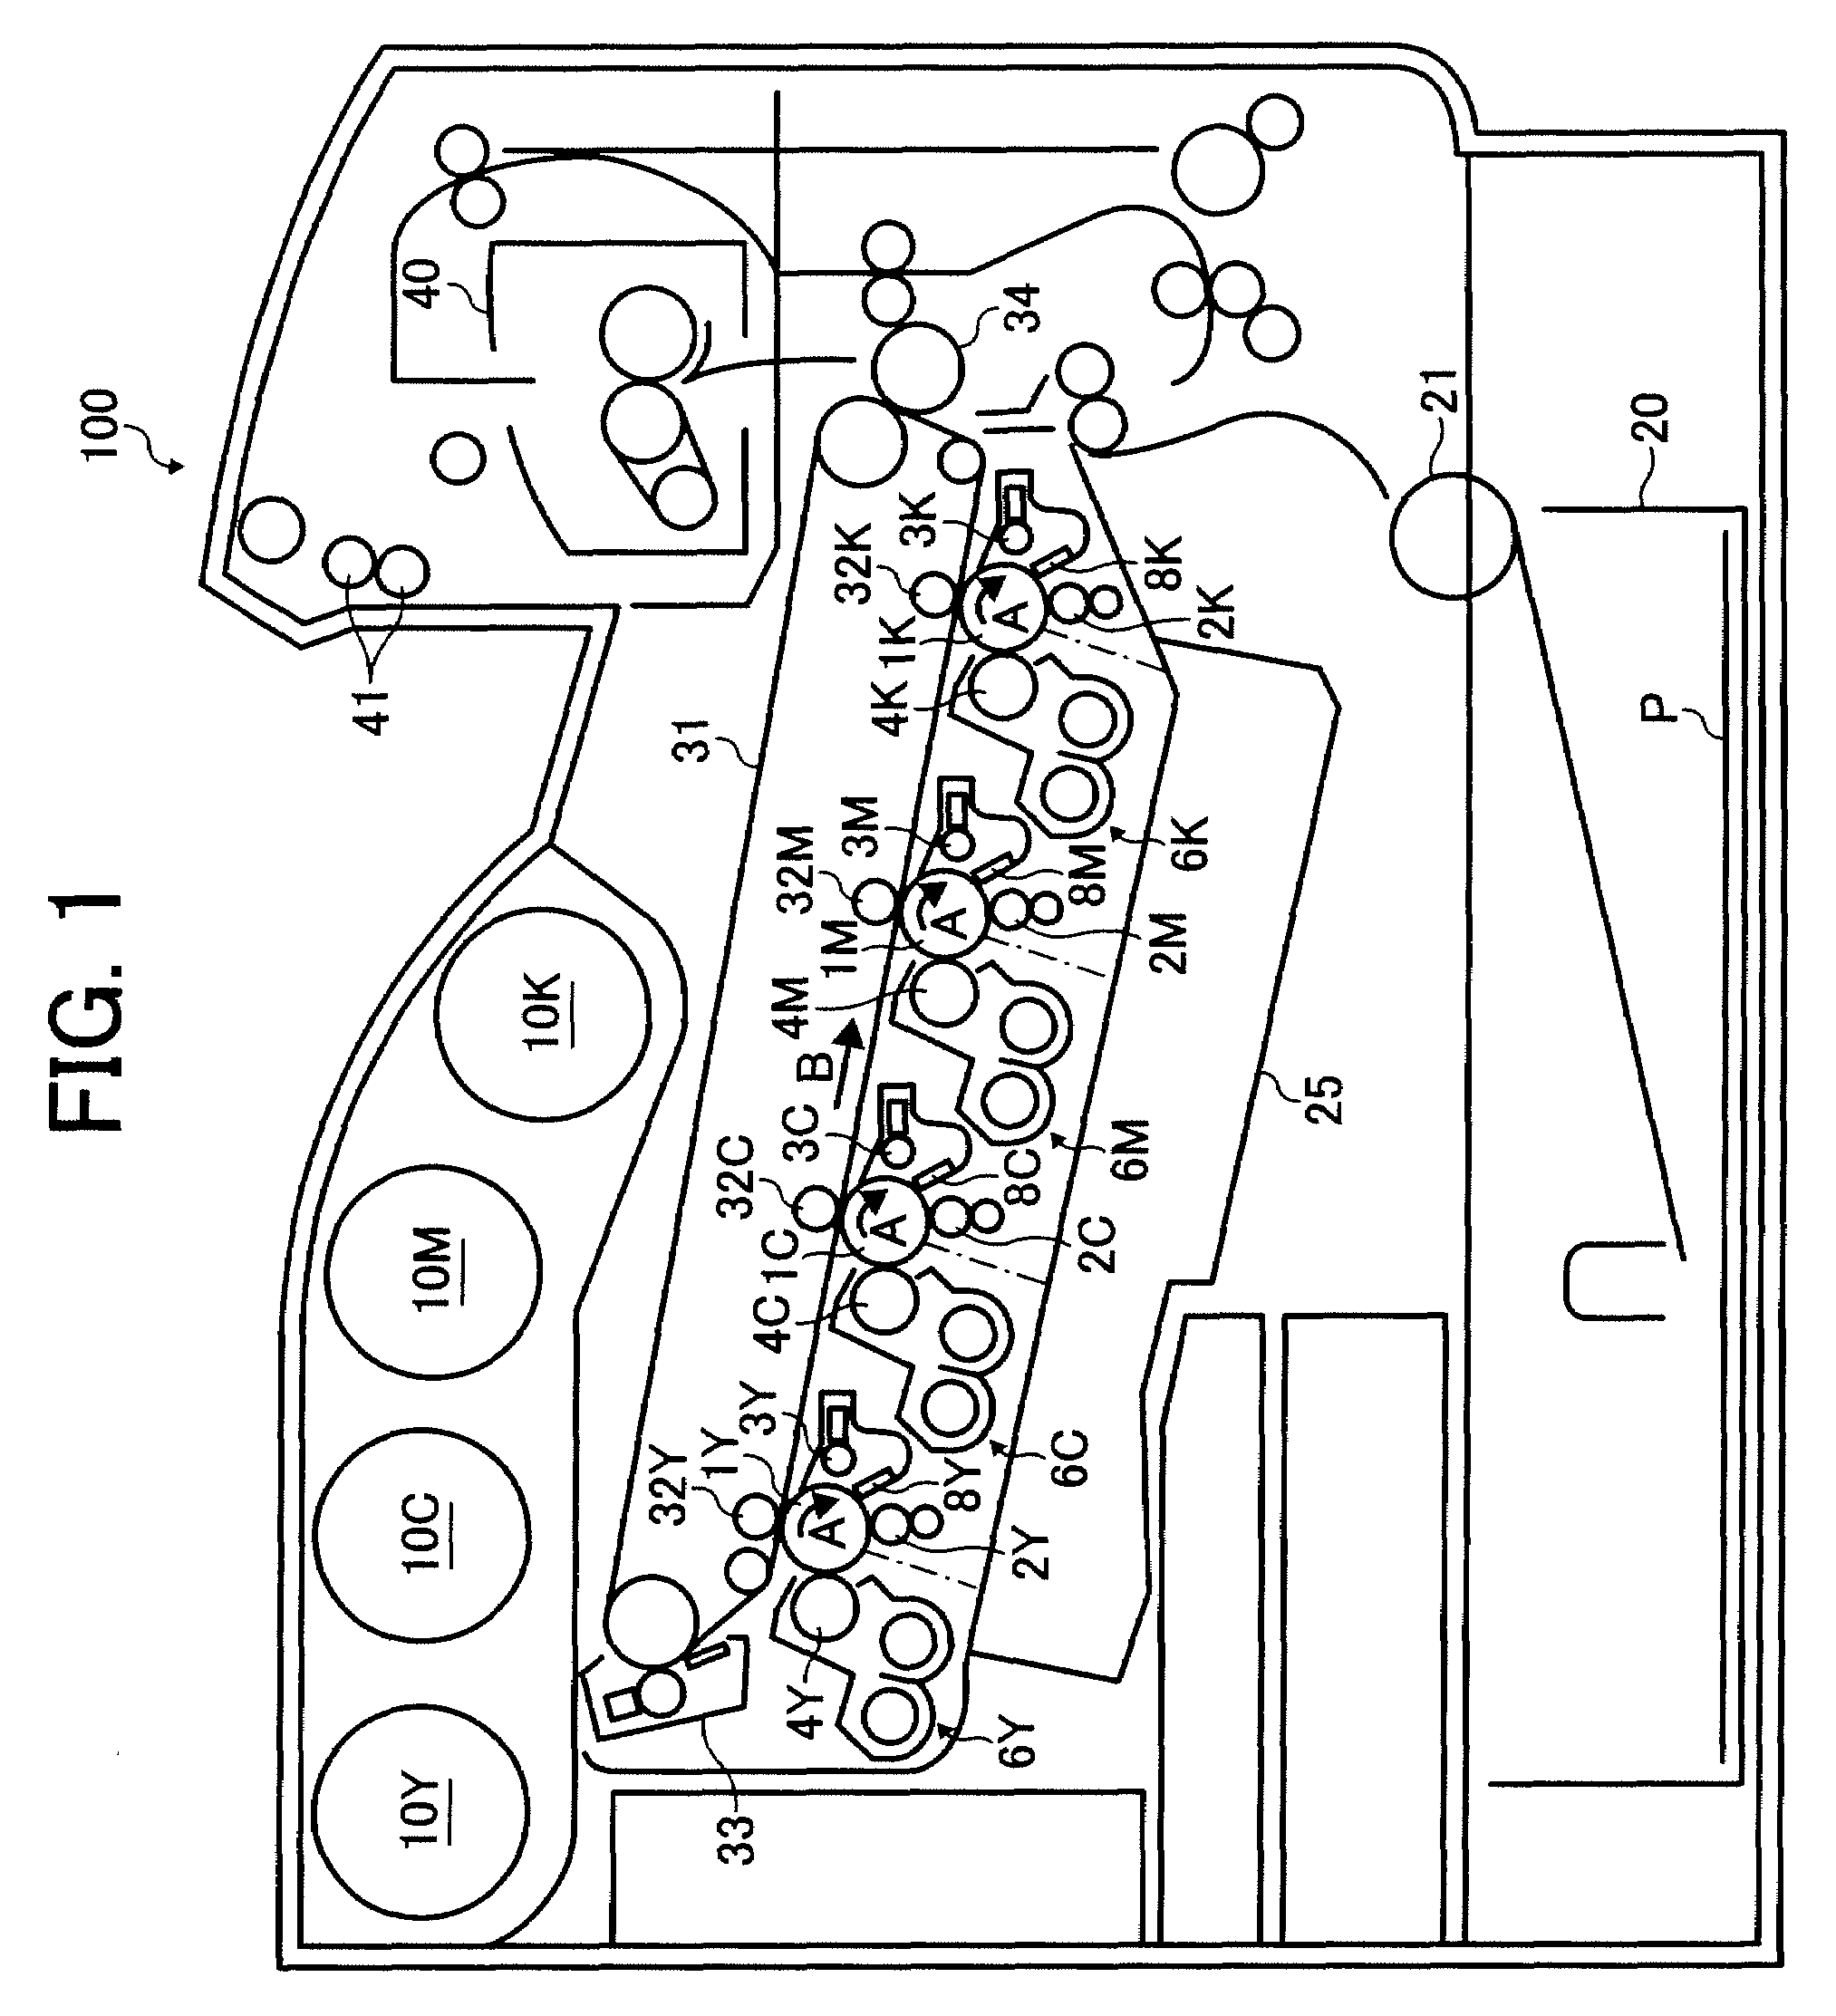 Image forming apparatus, process cartridge, and lubricant applicator